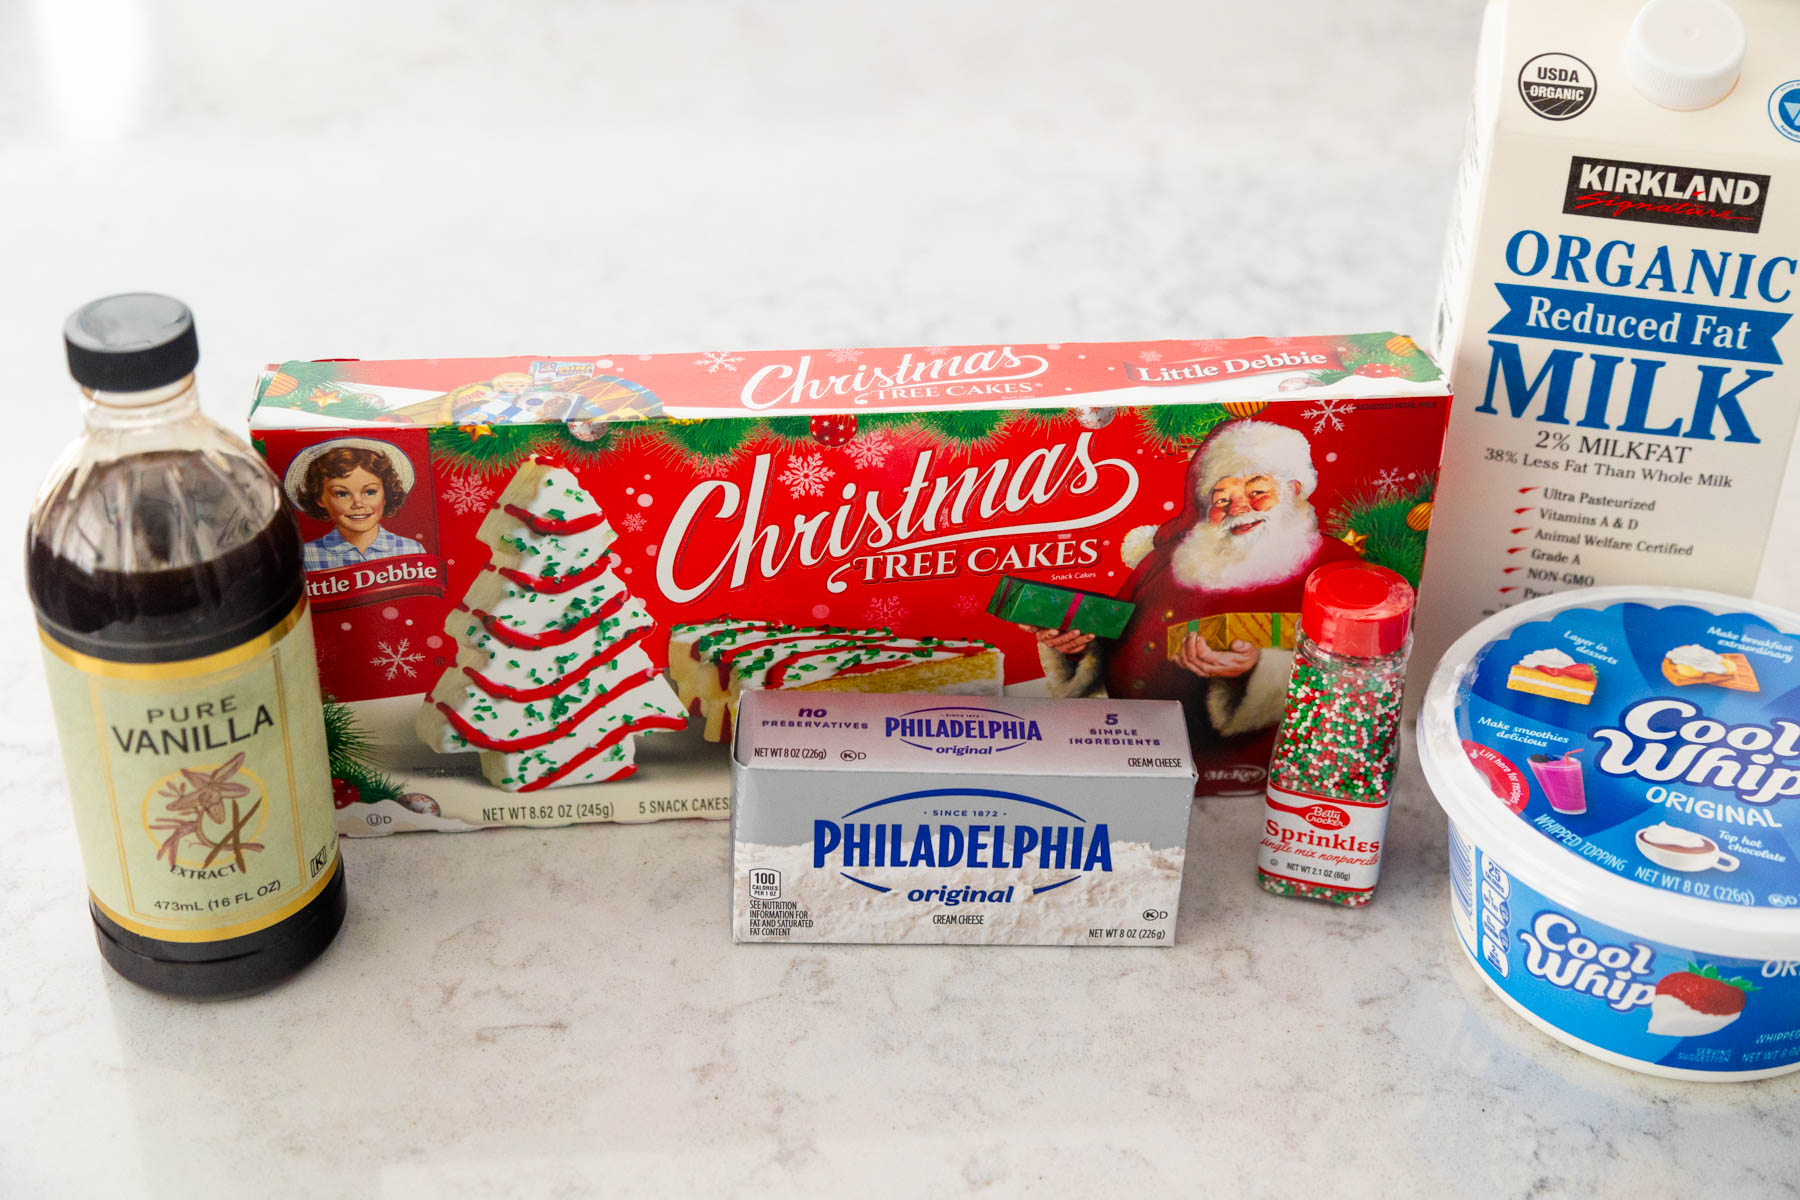 A box of Little Debbie Christmas Tree cakes is on the counter next to the ingredients to turn it into a dip.